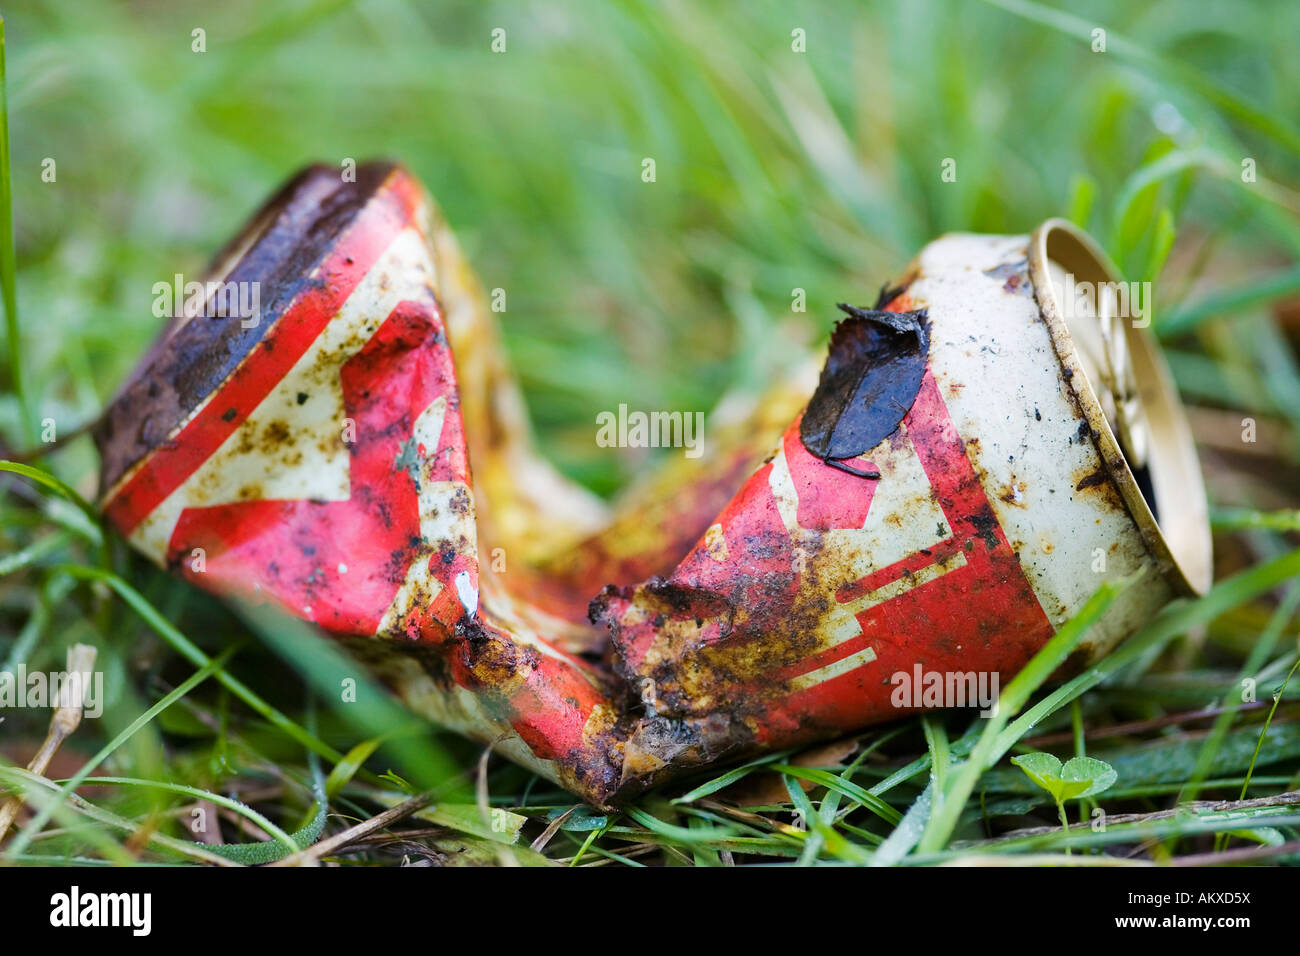 Beverage can on a meadow Stock Photo